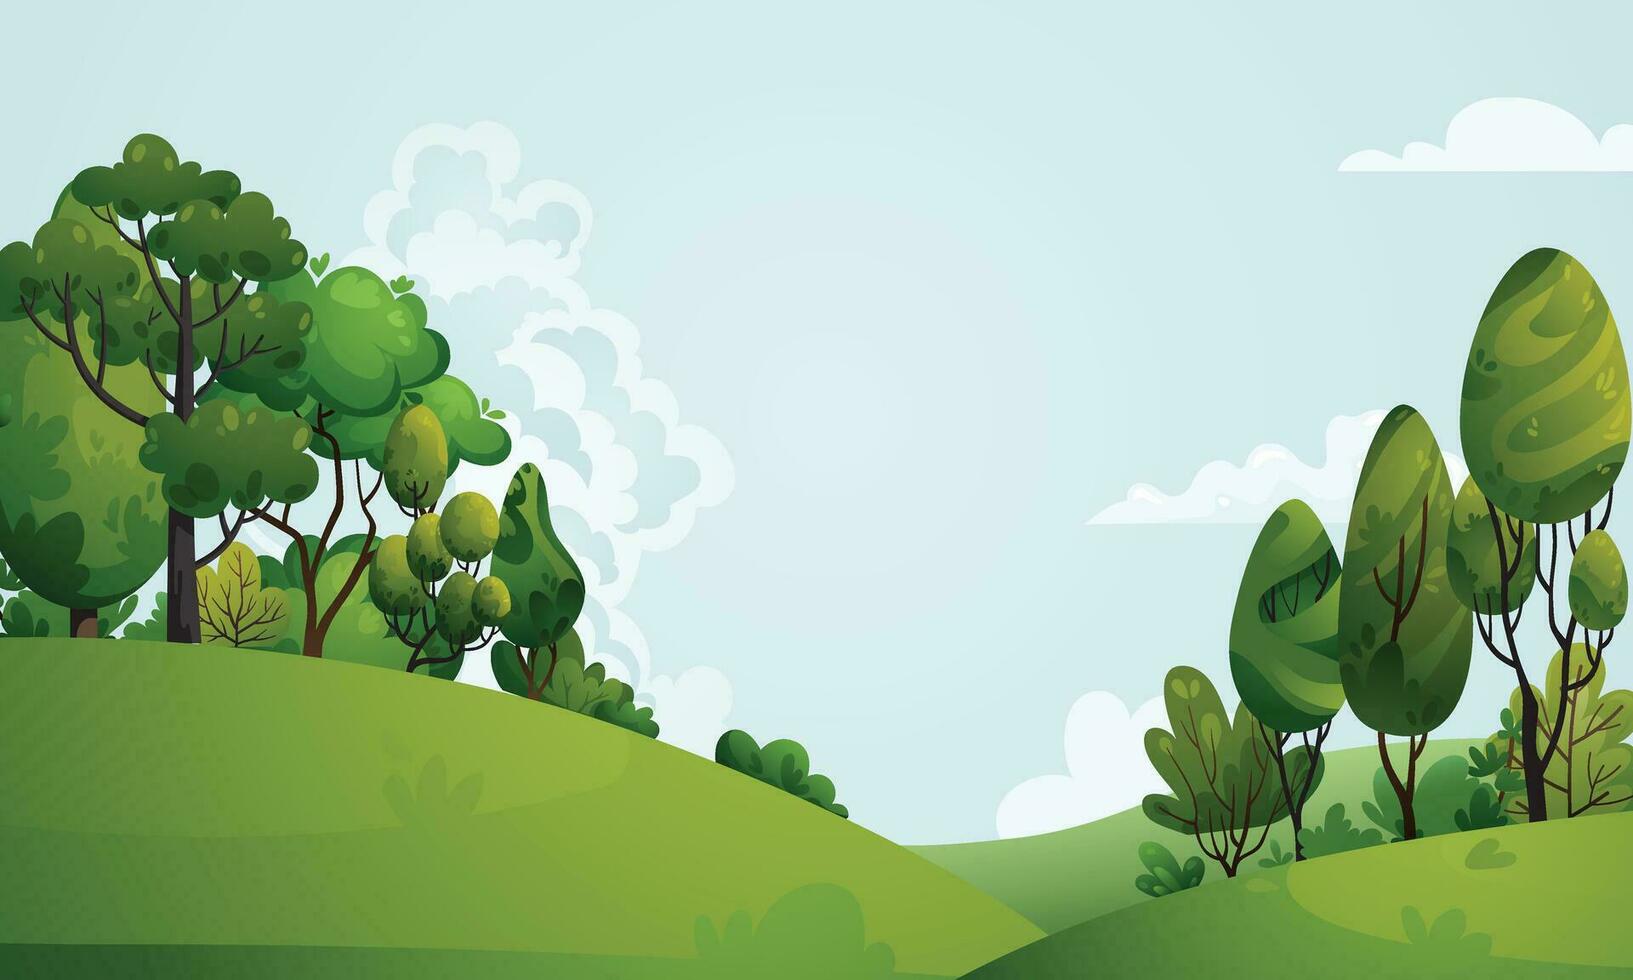 Summer nature landscape with hills, green trees, bushes, grass, meadow. Spring landscape with blue sky, clouds, forest, park, shrubs, trees in cartoon style. Woodland background vector illustration.